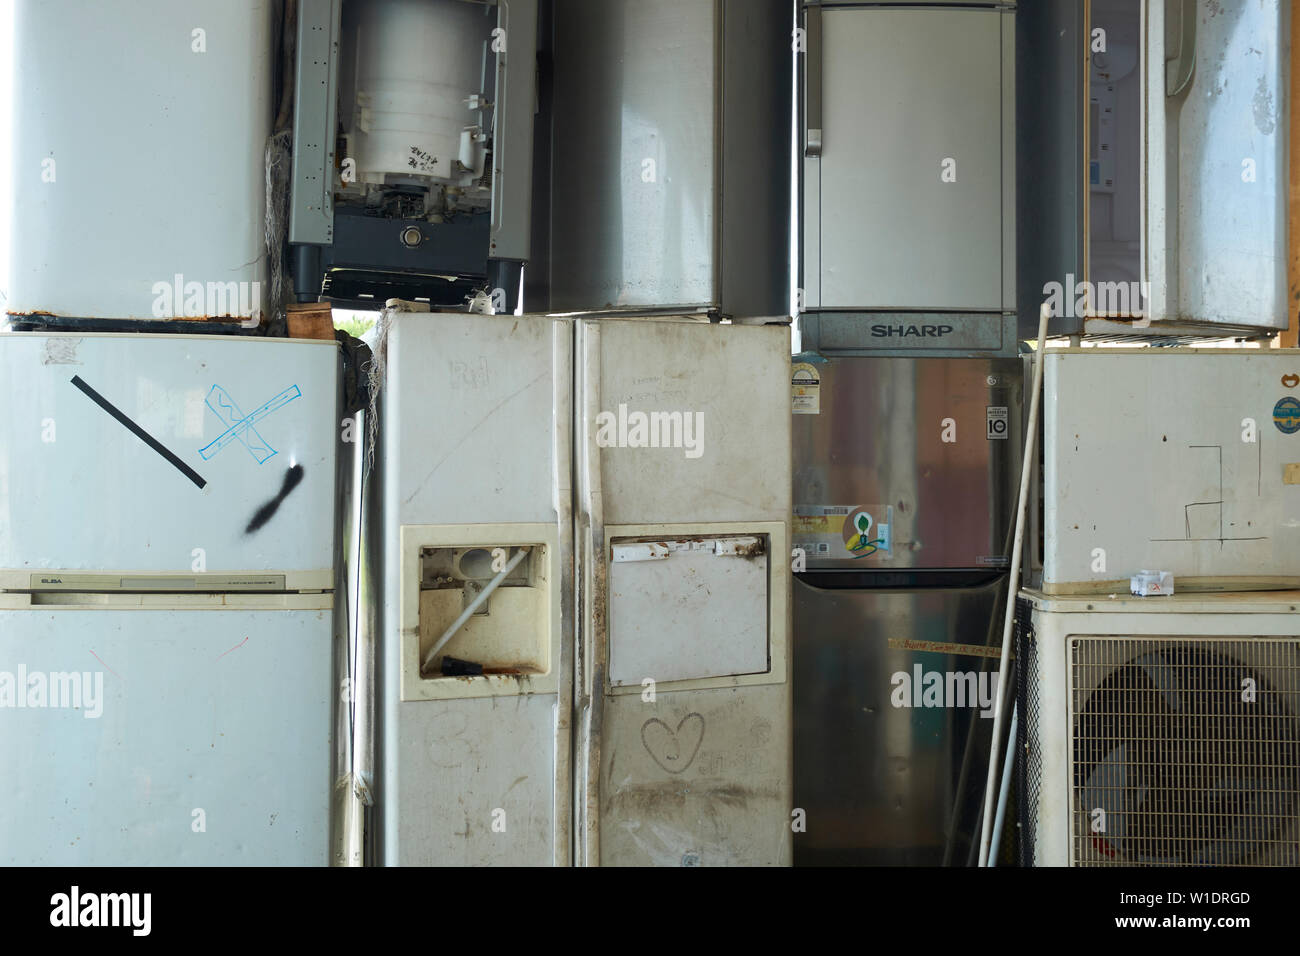 Old refridgerators and appliances ready for recycling outside a shop in Miri, Borneo, Malaysia. Stock Photo